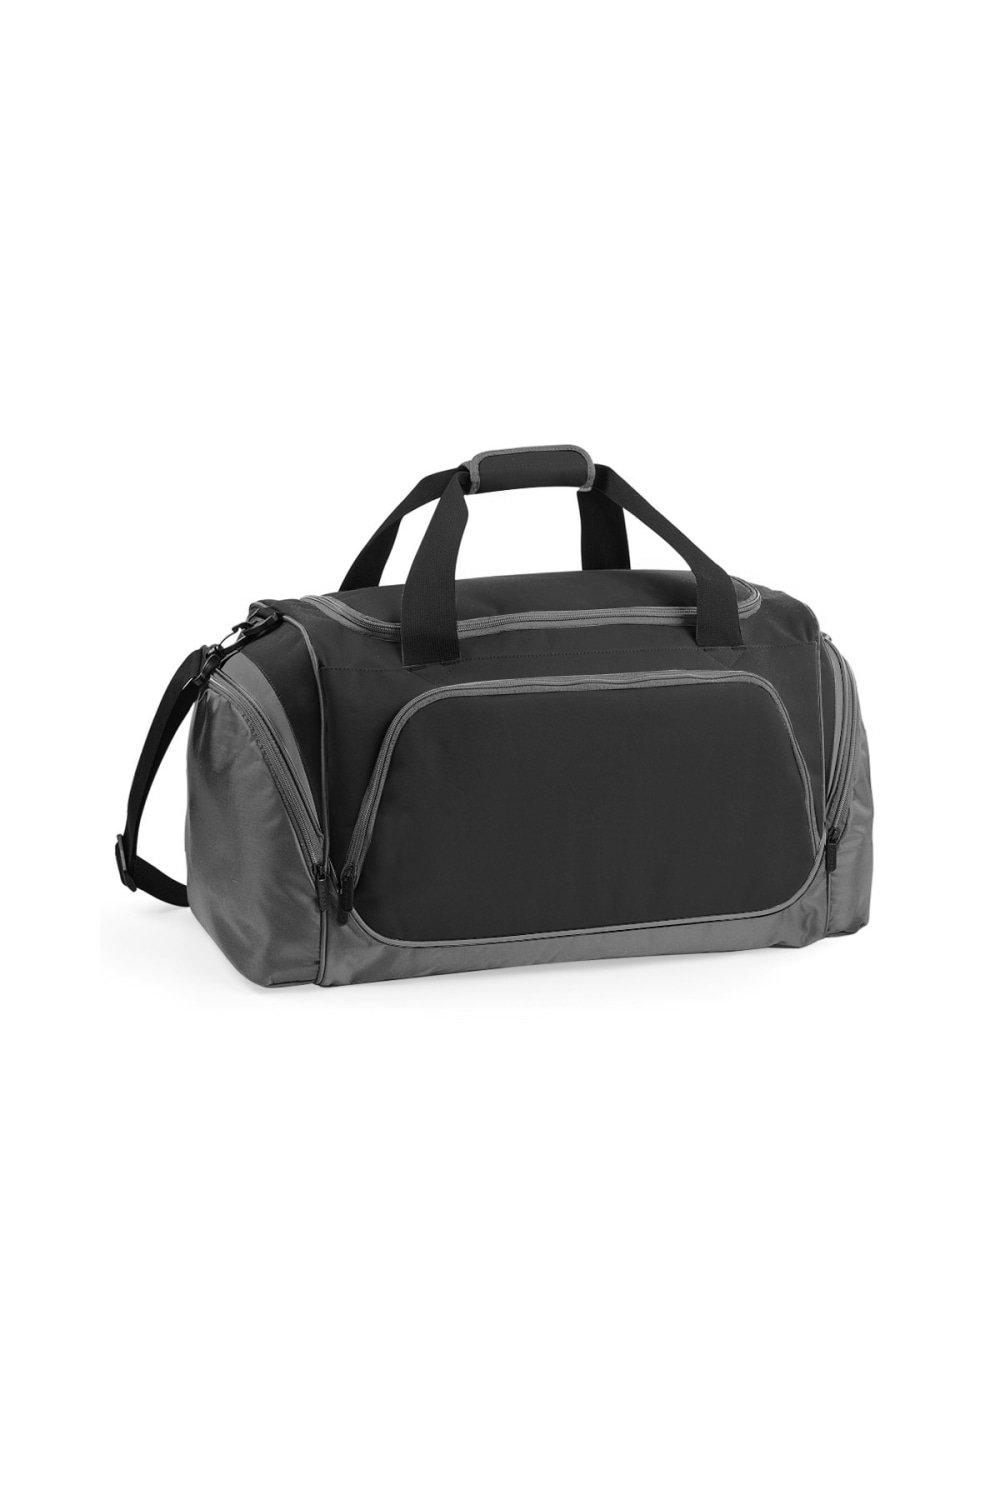 Pro Team Holdall Duffle Bag (55 Litres) Pack of 2